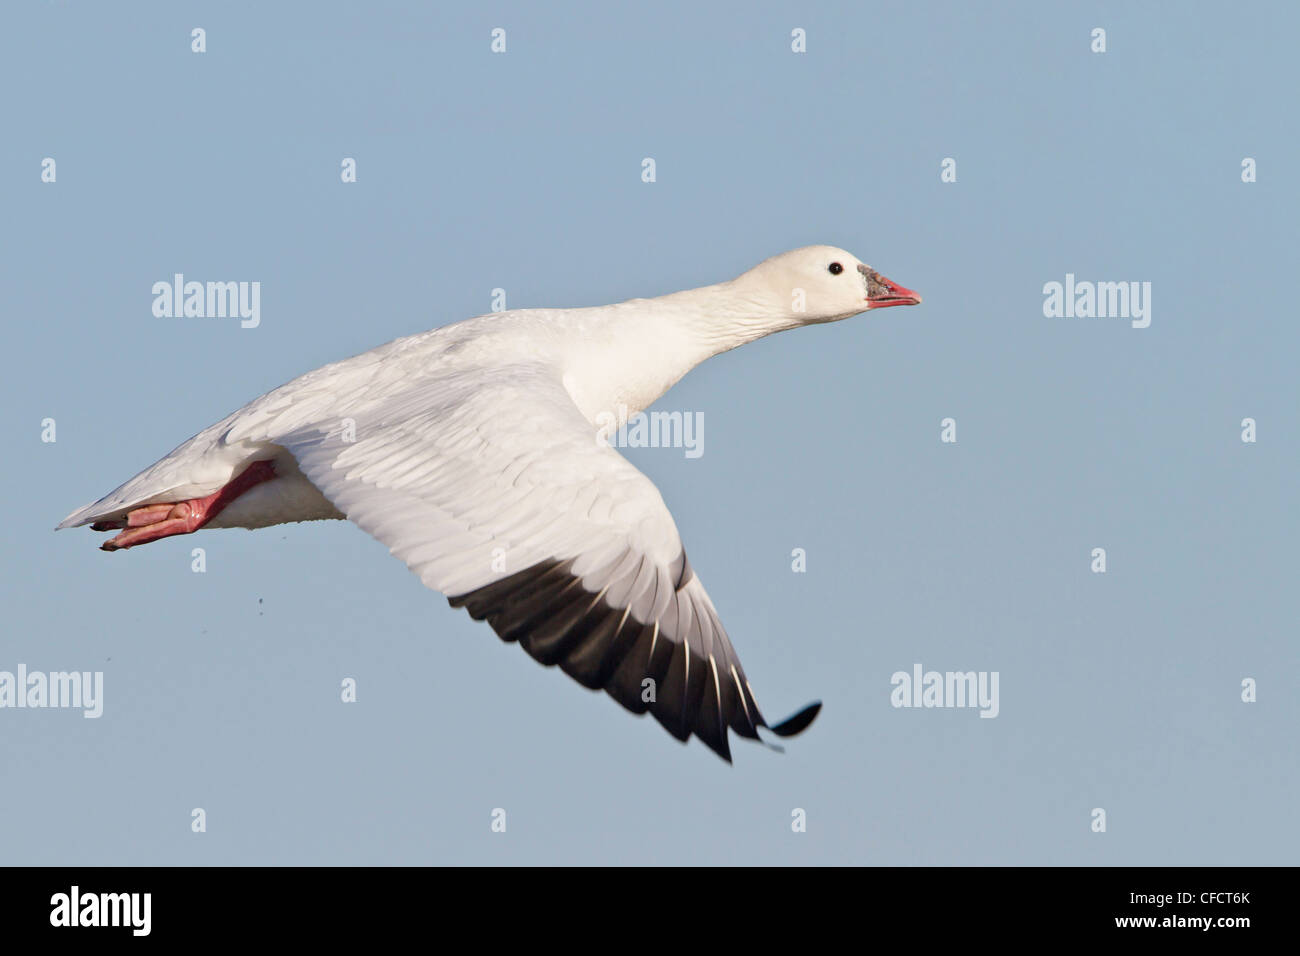 Ross's Goose (Chen rossii) flying at the Bosque del Apache wildlife refuge near Socorro, New Mexico, United States of America. Stock Photo